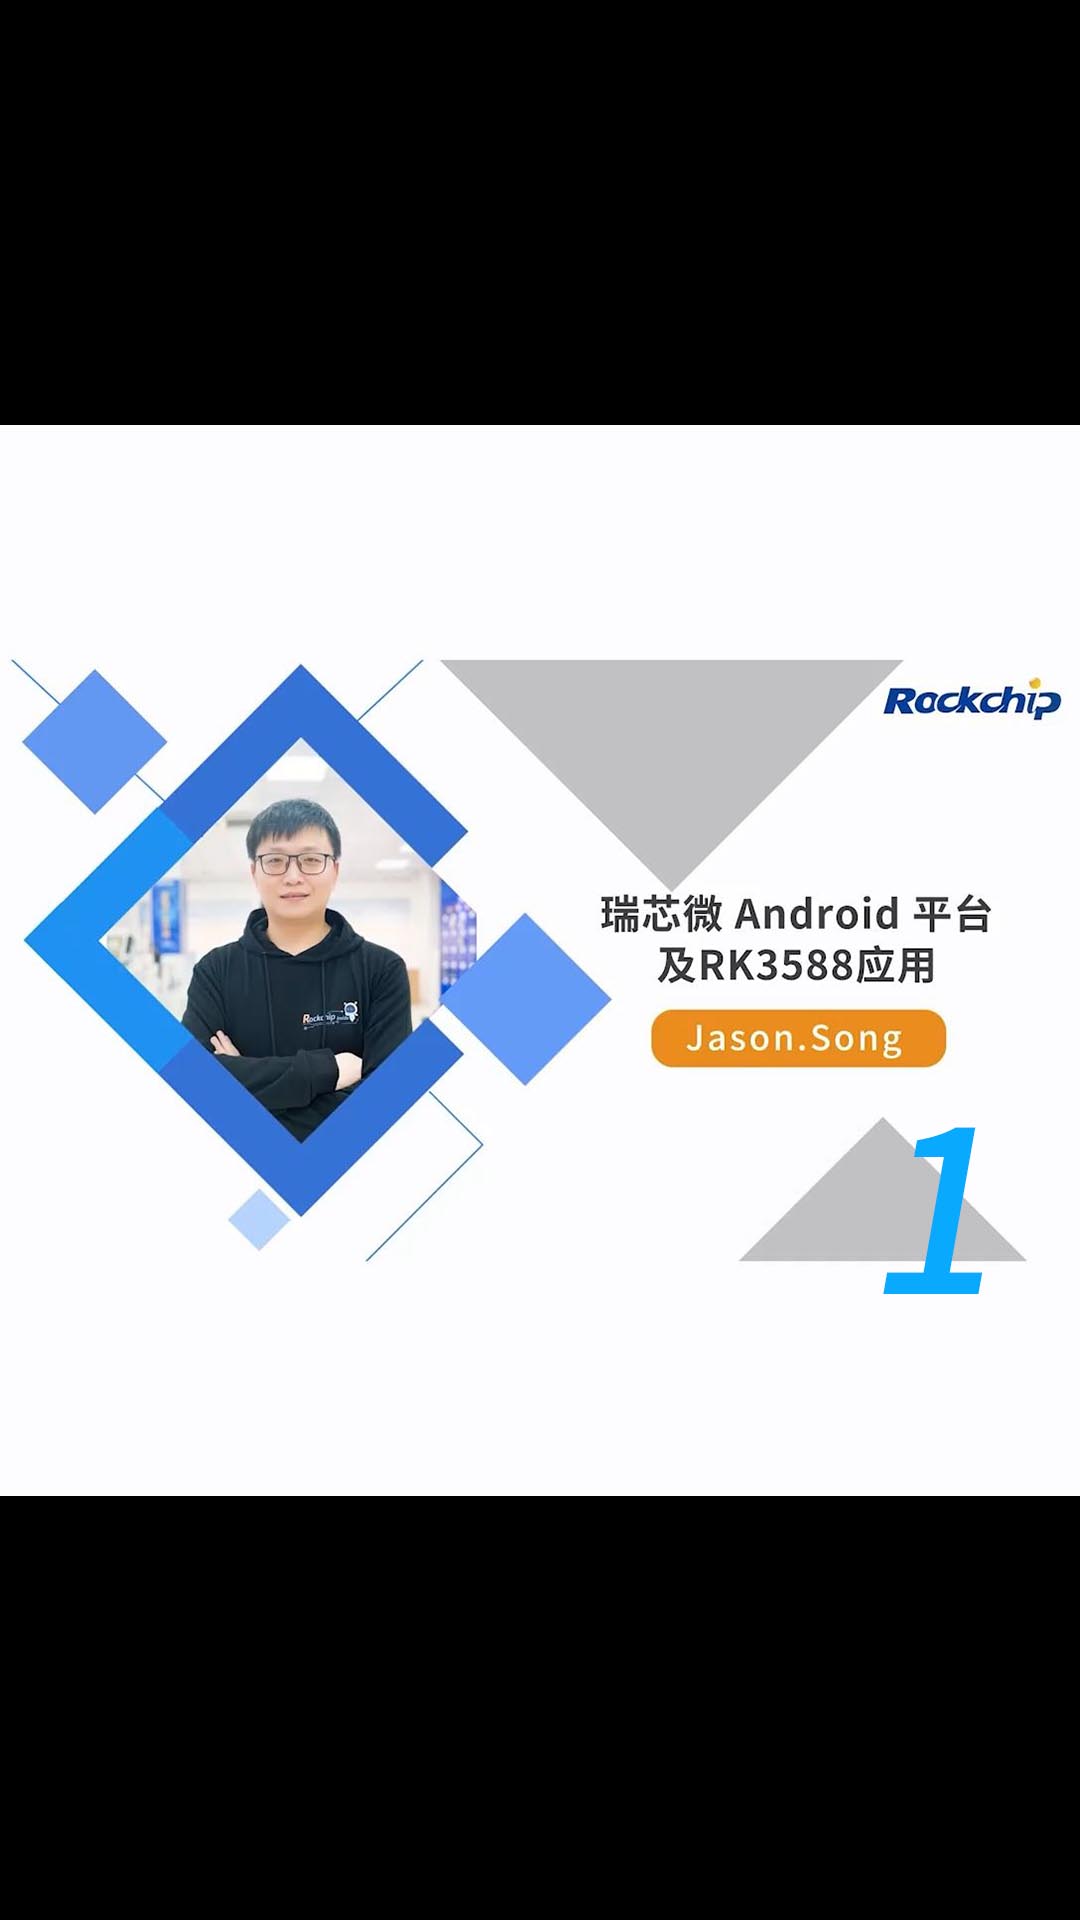 【RK公开课】Android 平台及RK3588应用 - RKDC2021-1